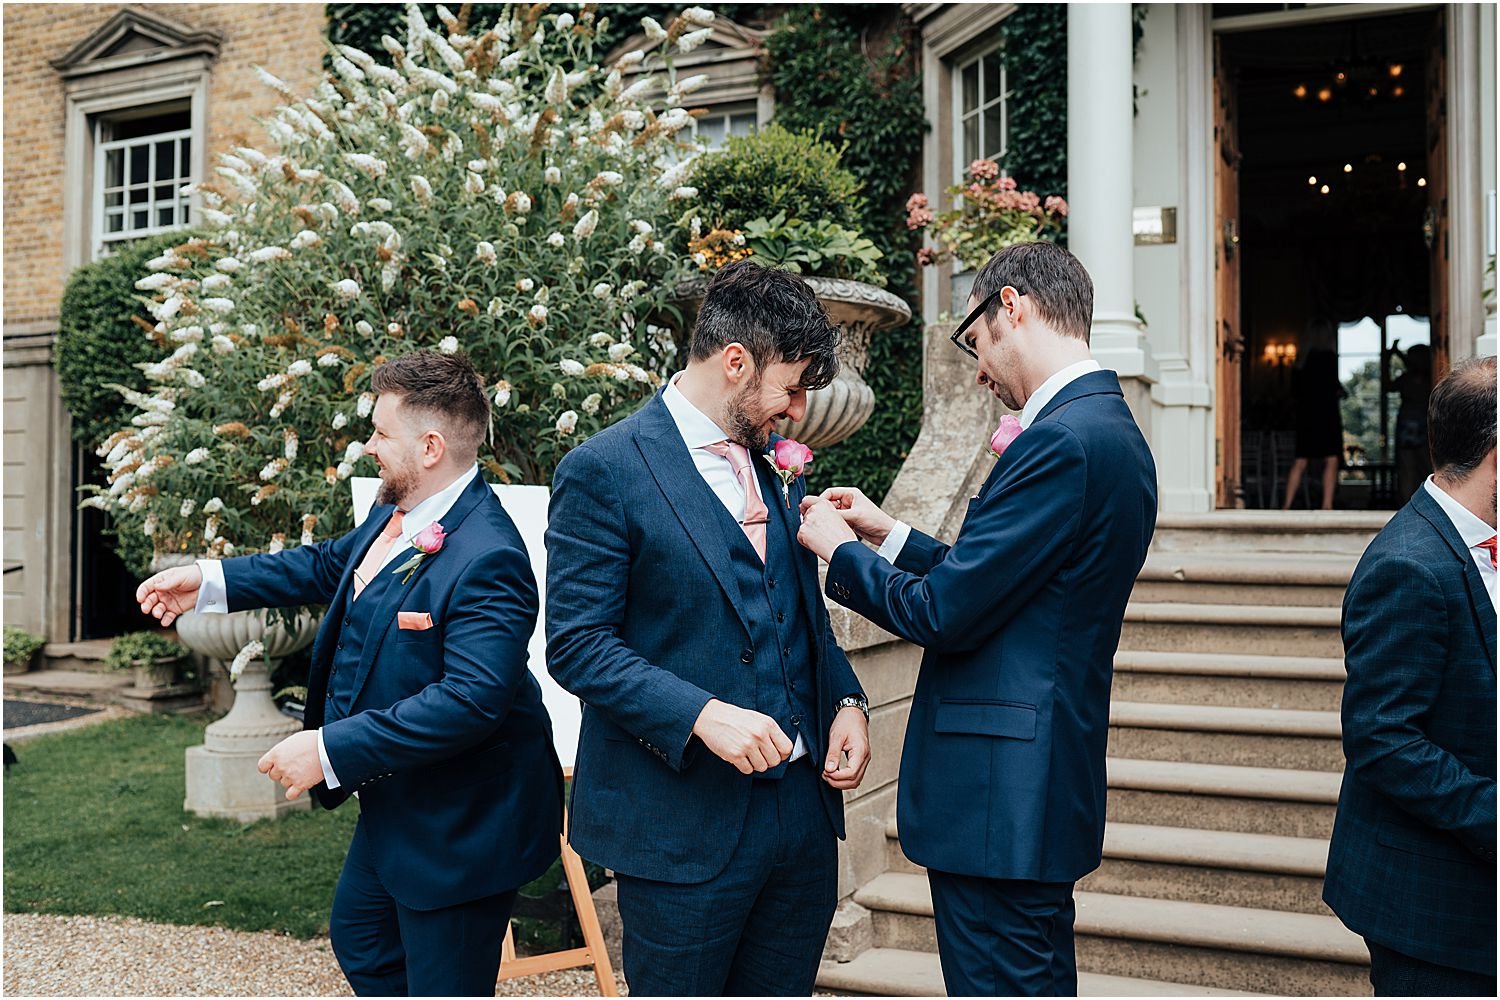 Groom putting on button holes before ceremony 